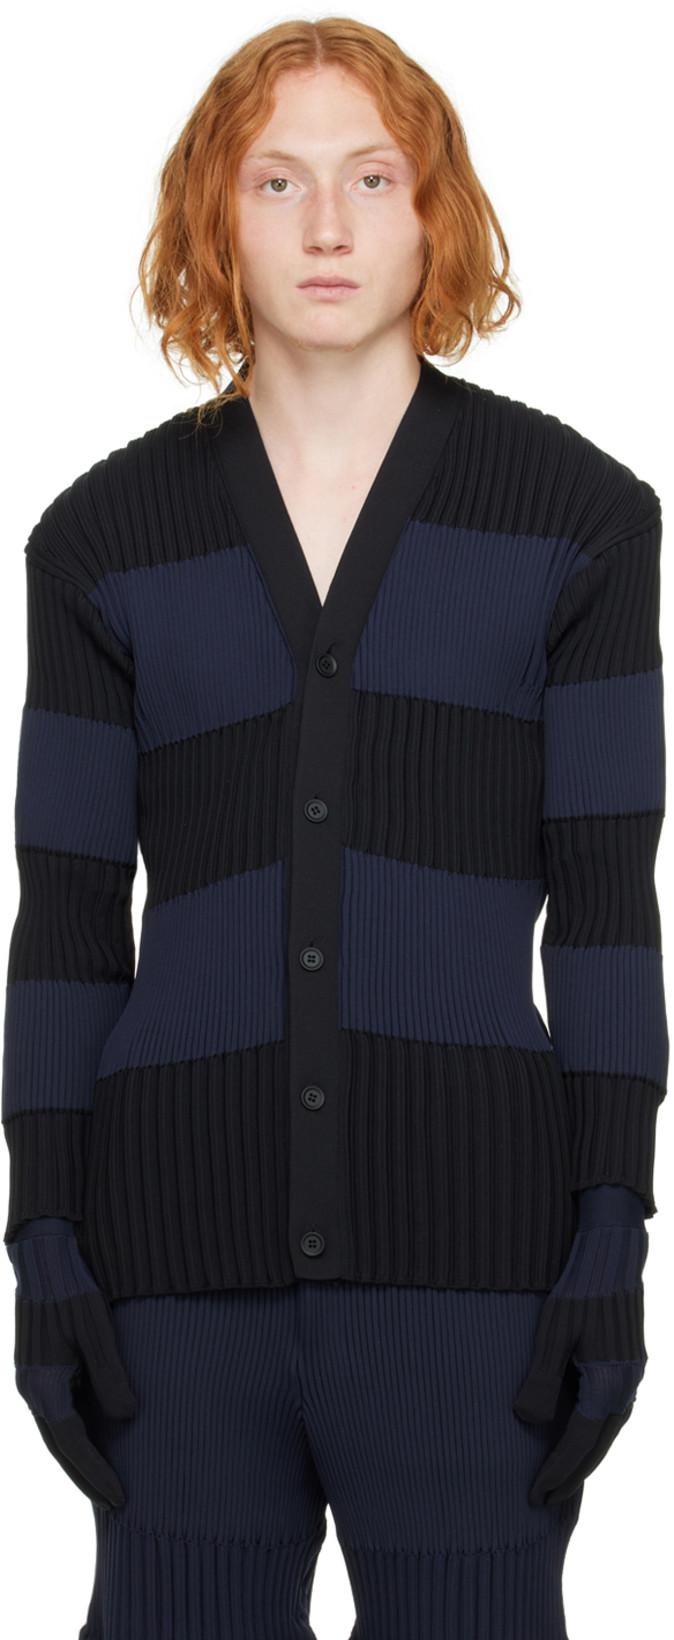 SSENSE Exclusive Black & Navy Fluted Cardigan by CFCL